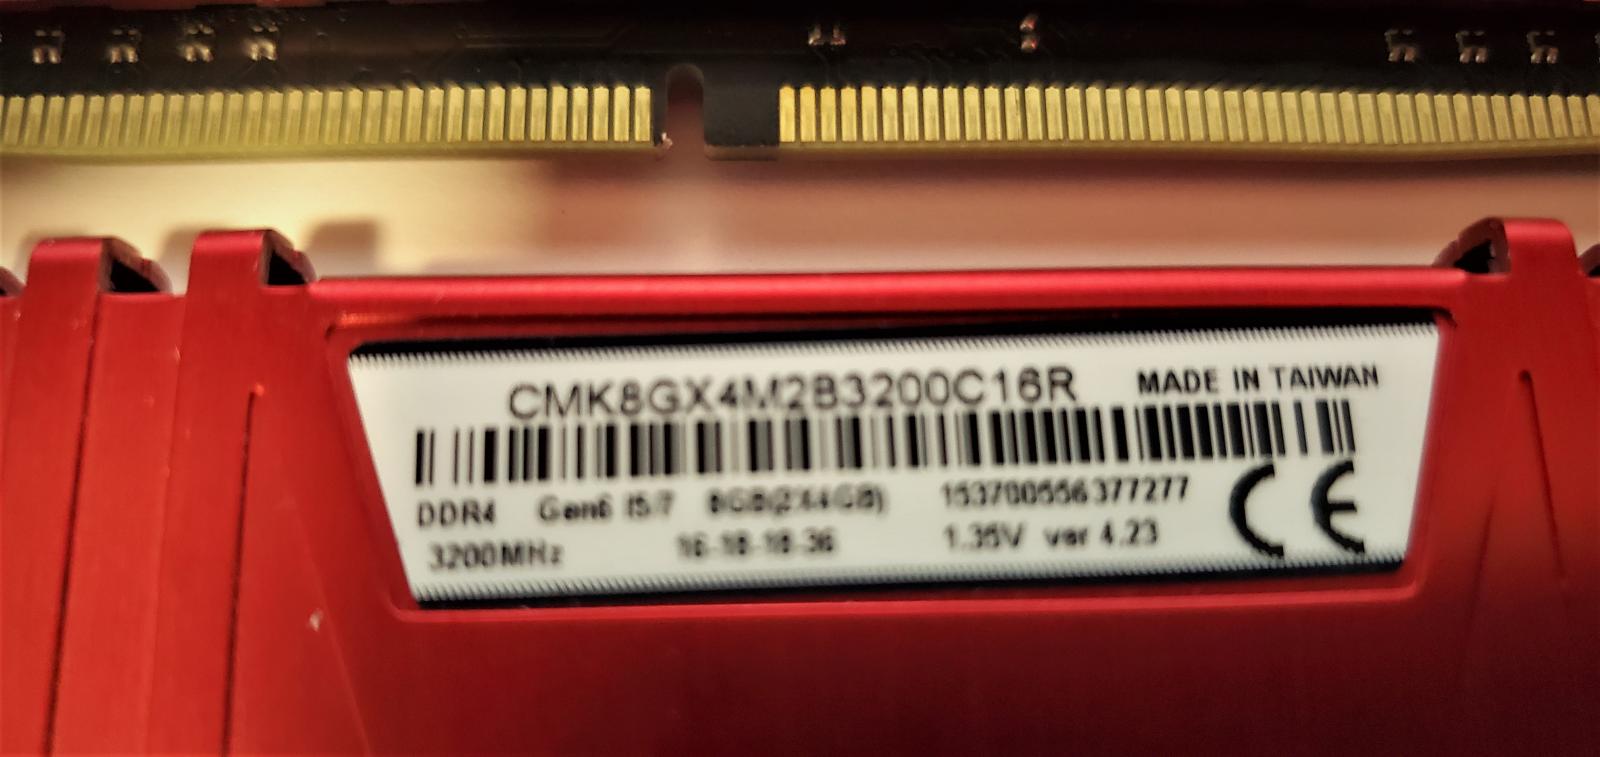 For sale Corsair Vengeance LPX DDR4-3200 8GB (2x 4GB) RED